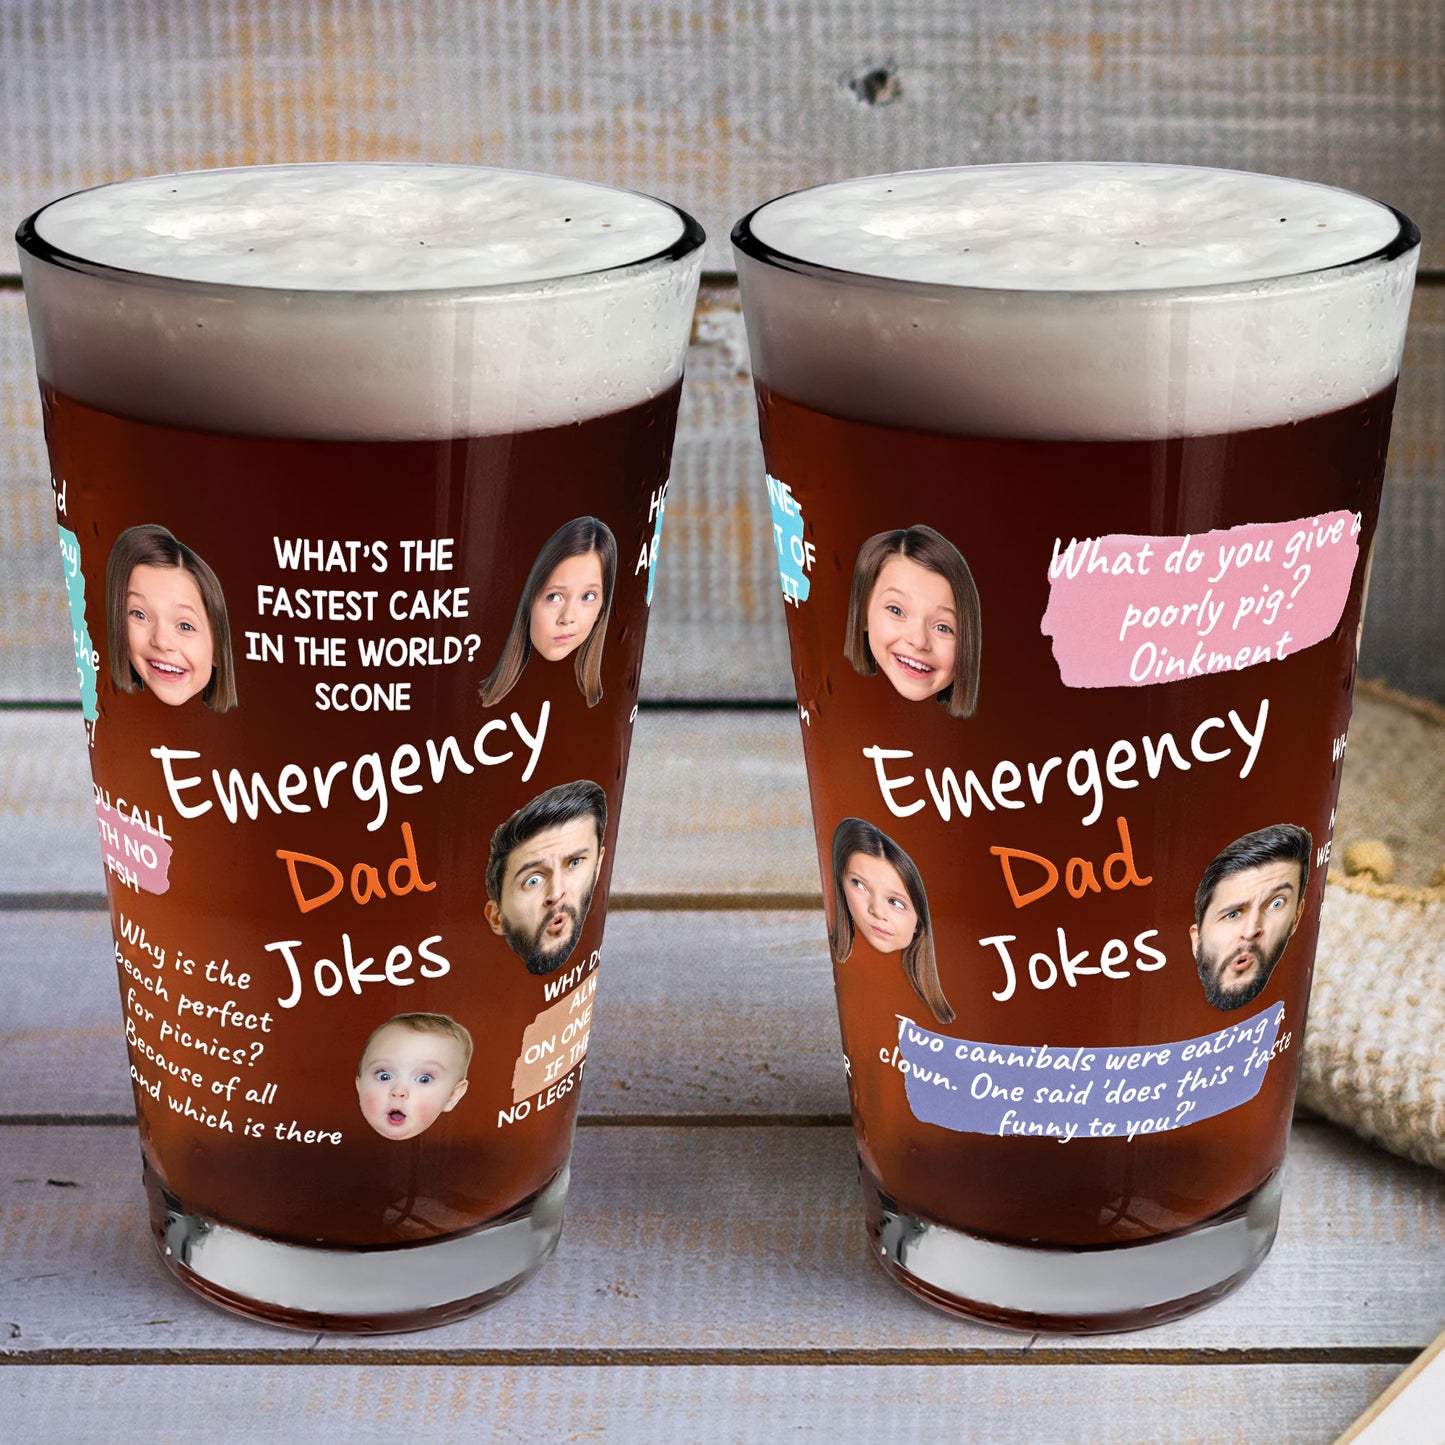 Emergency Dad Jokes Custom Funny Faces - Personalized Photo Beer Glass